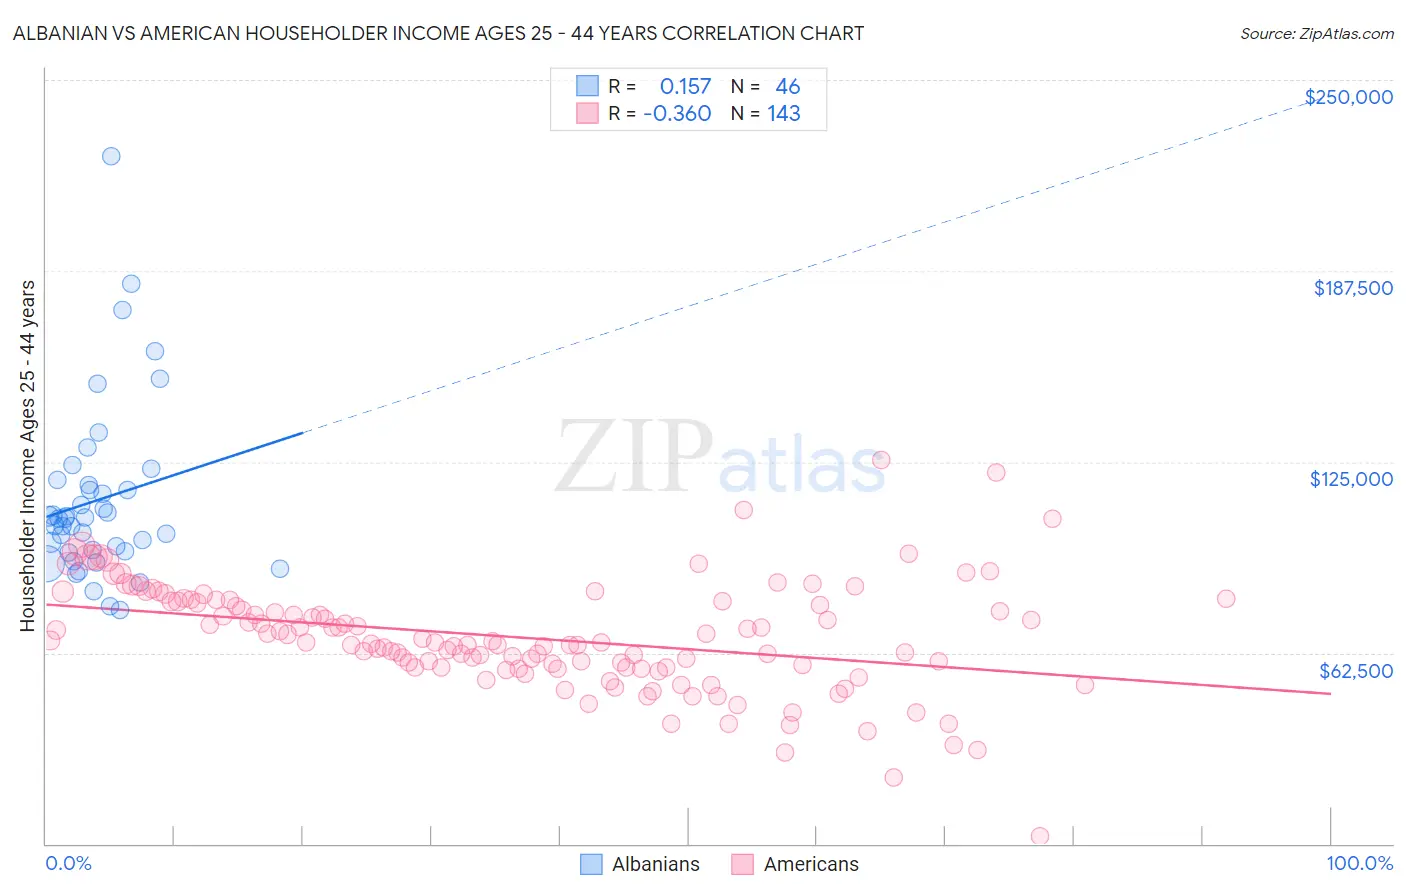 Albanian vs American Householder Income Ages 25 - 44 years